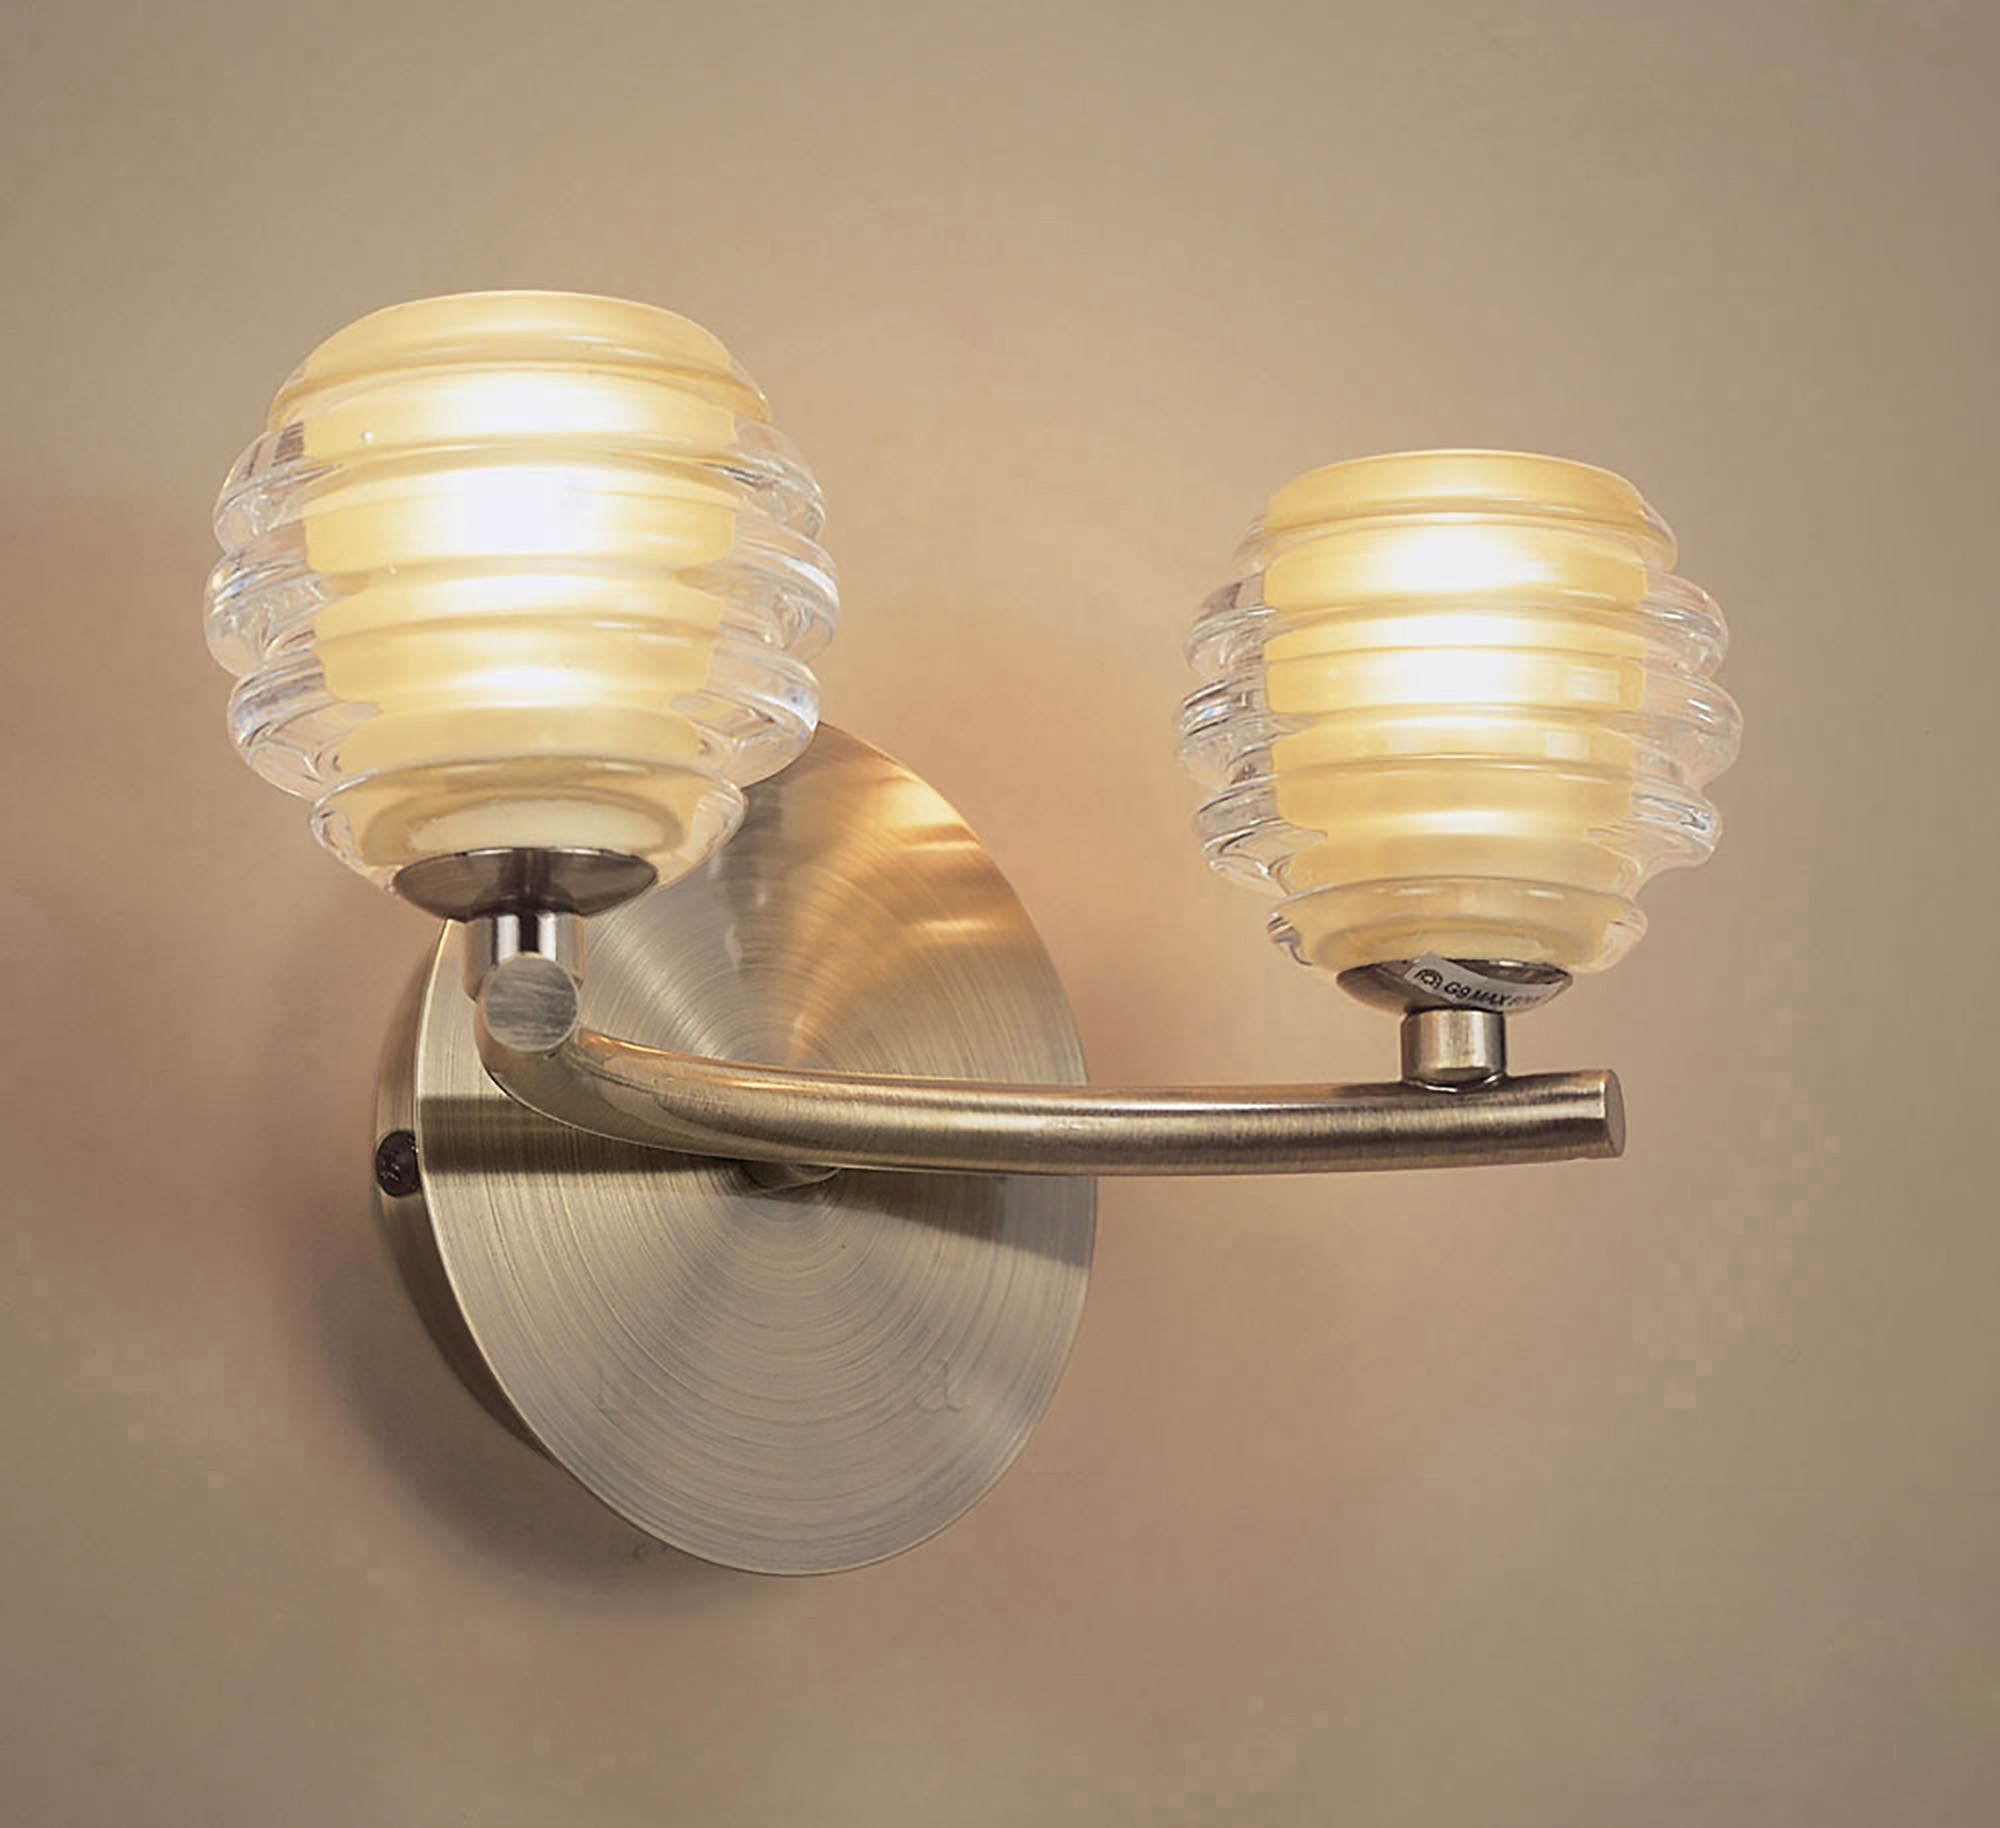 Sphere AB Wall Lights Mantra Armed Wall Lights